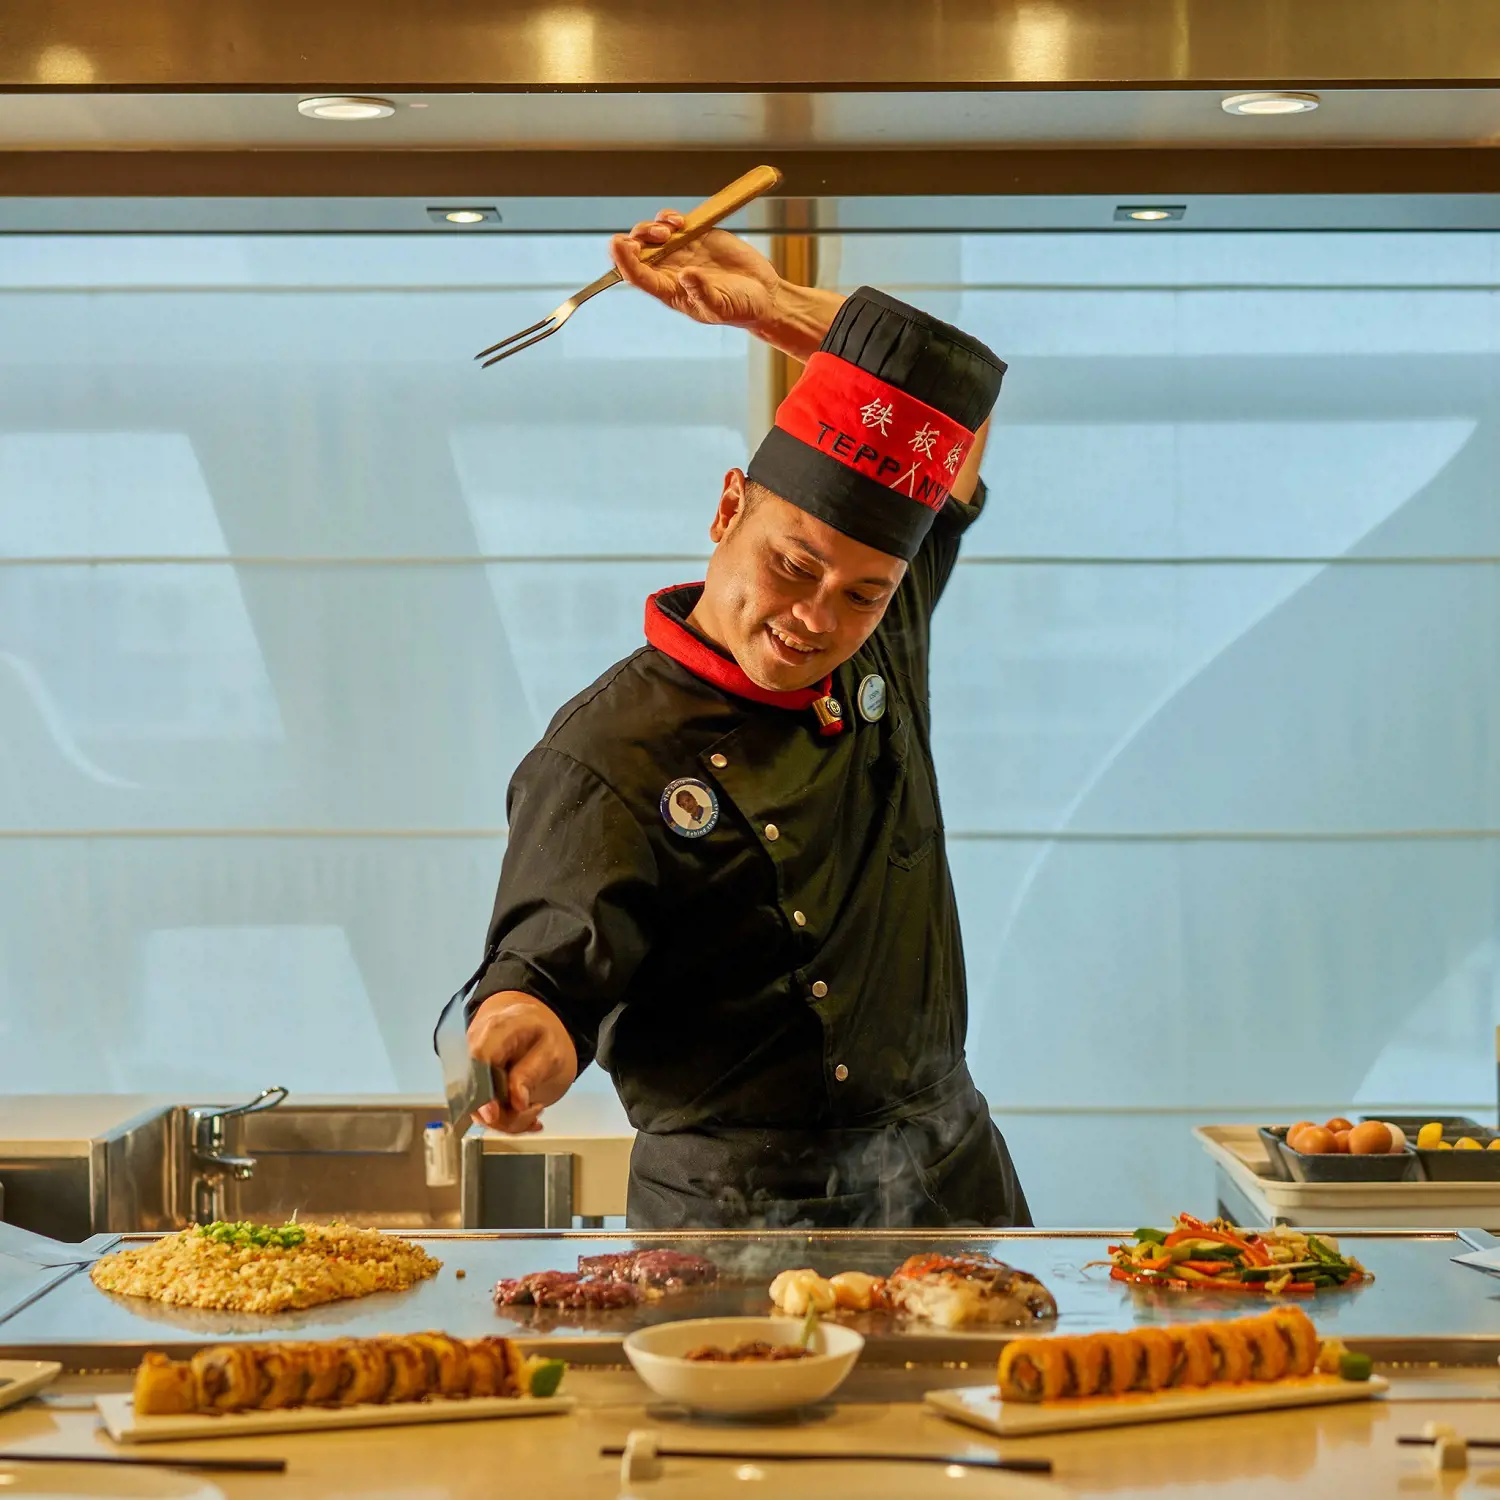 Teppanyaki culinary show carried by the Royal Caribbean Internal in July 2022